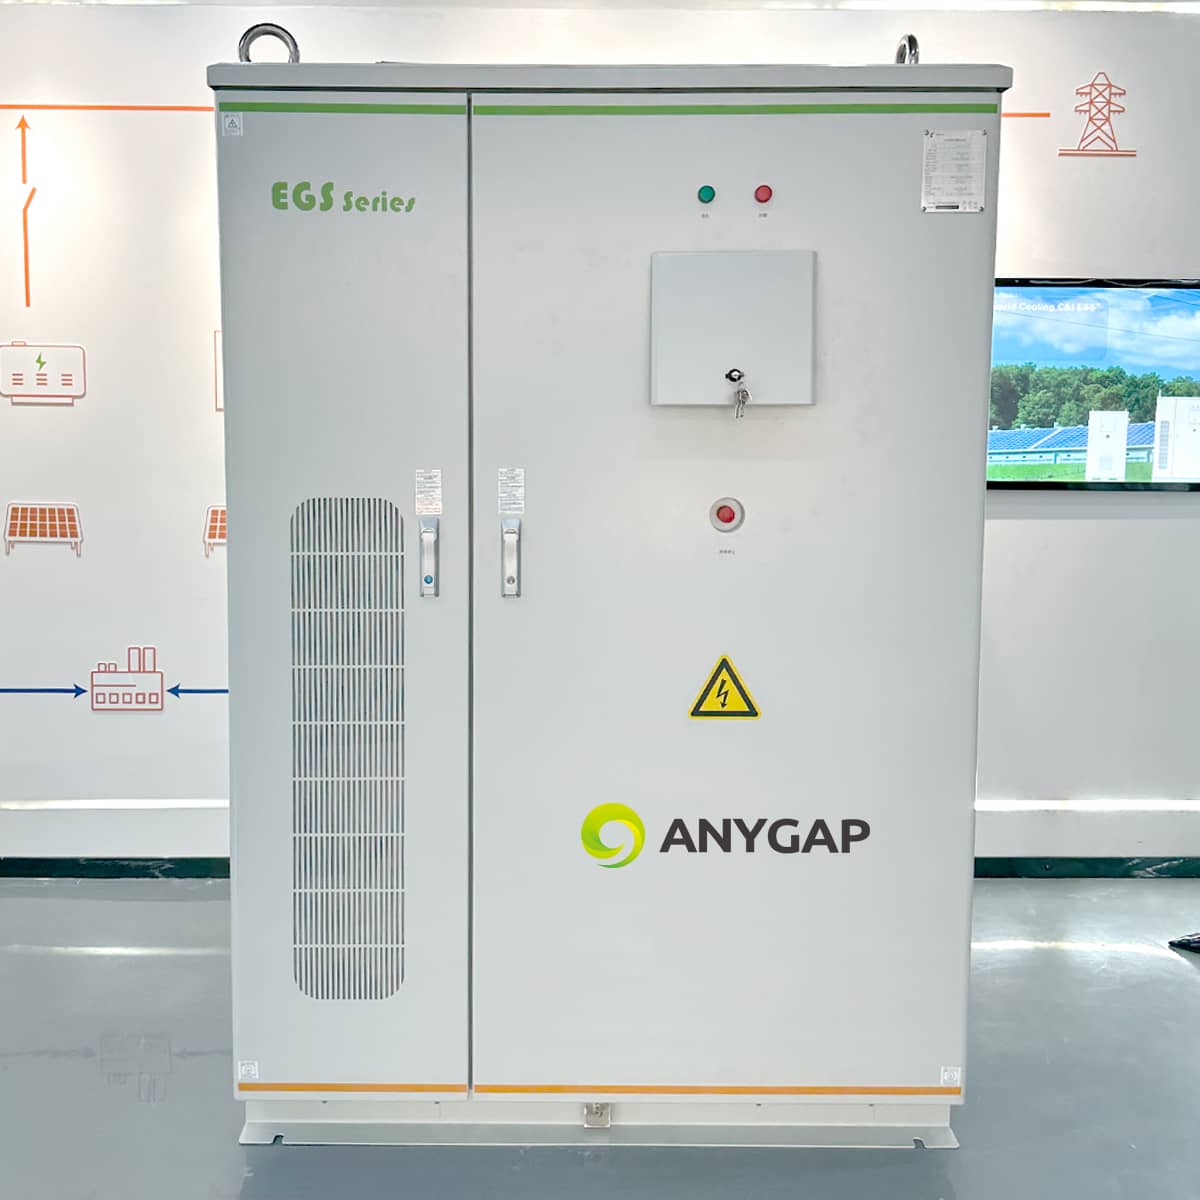 All-in-one distributed energy storage system